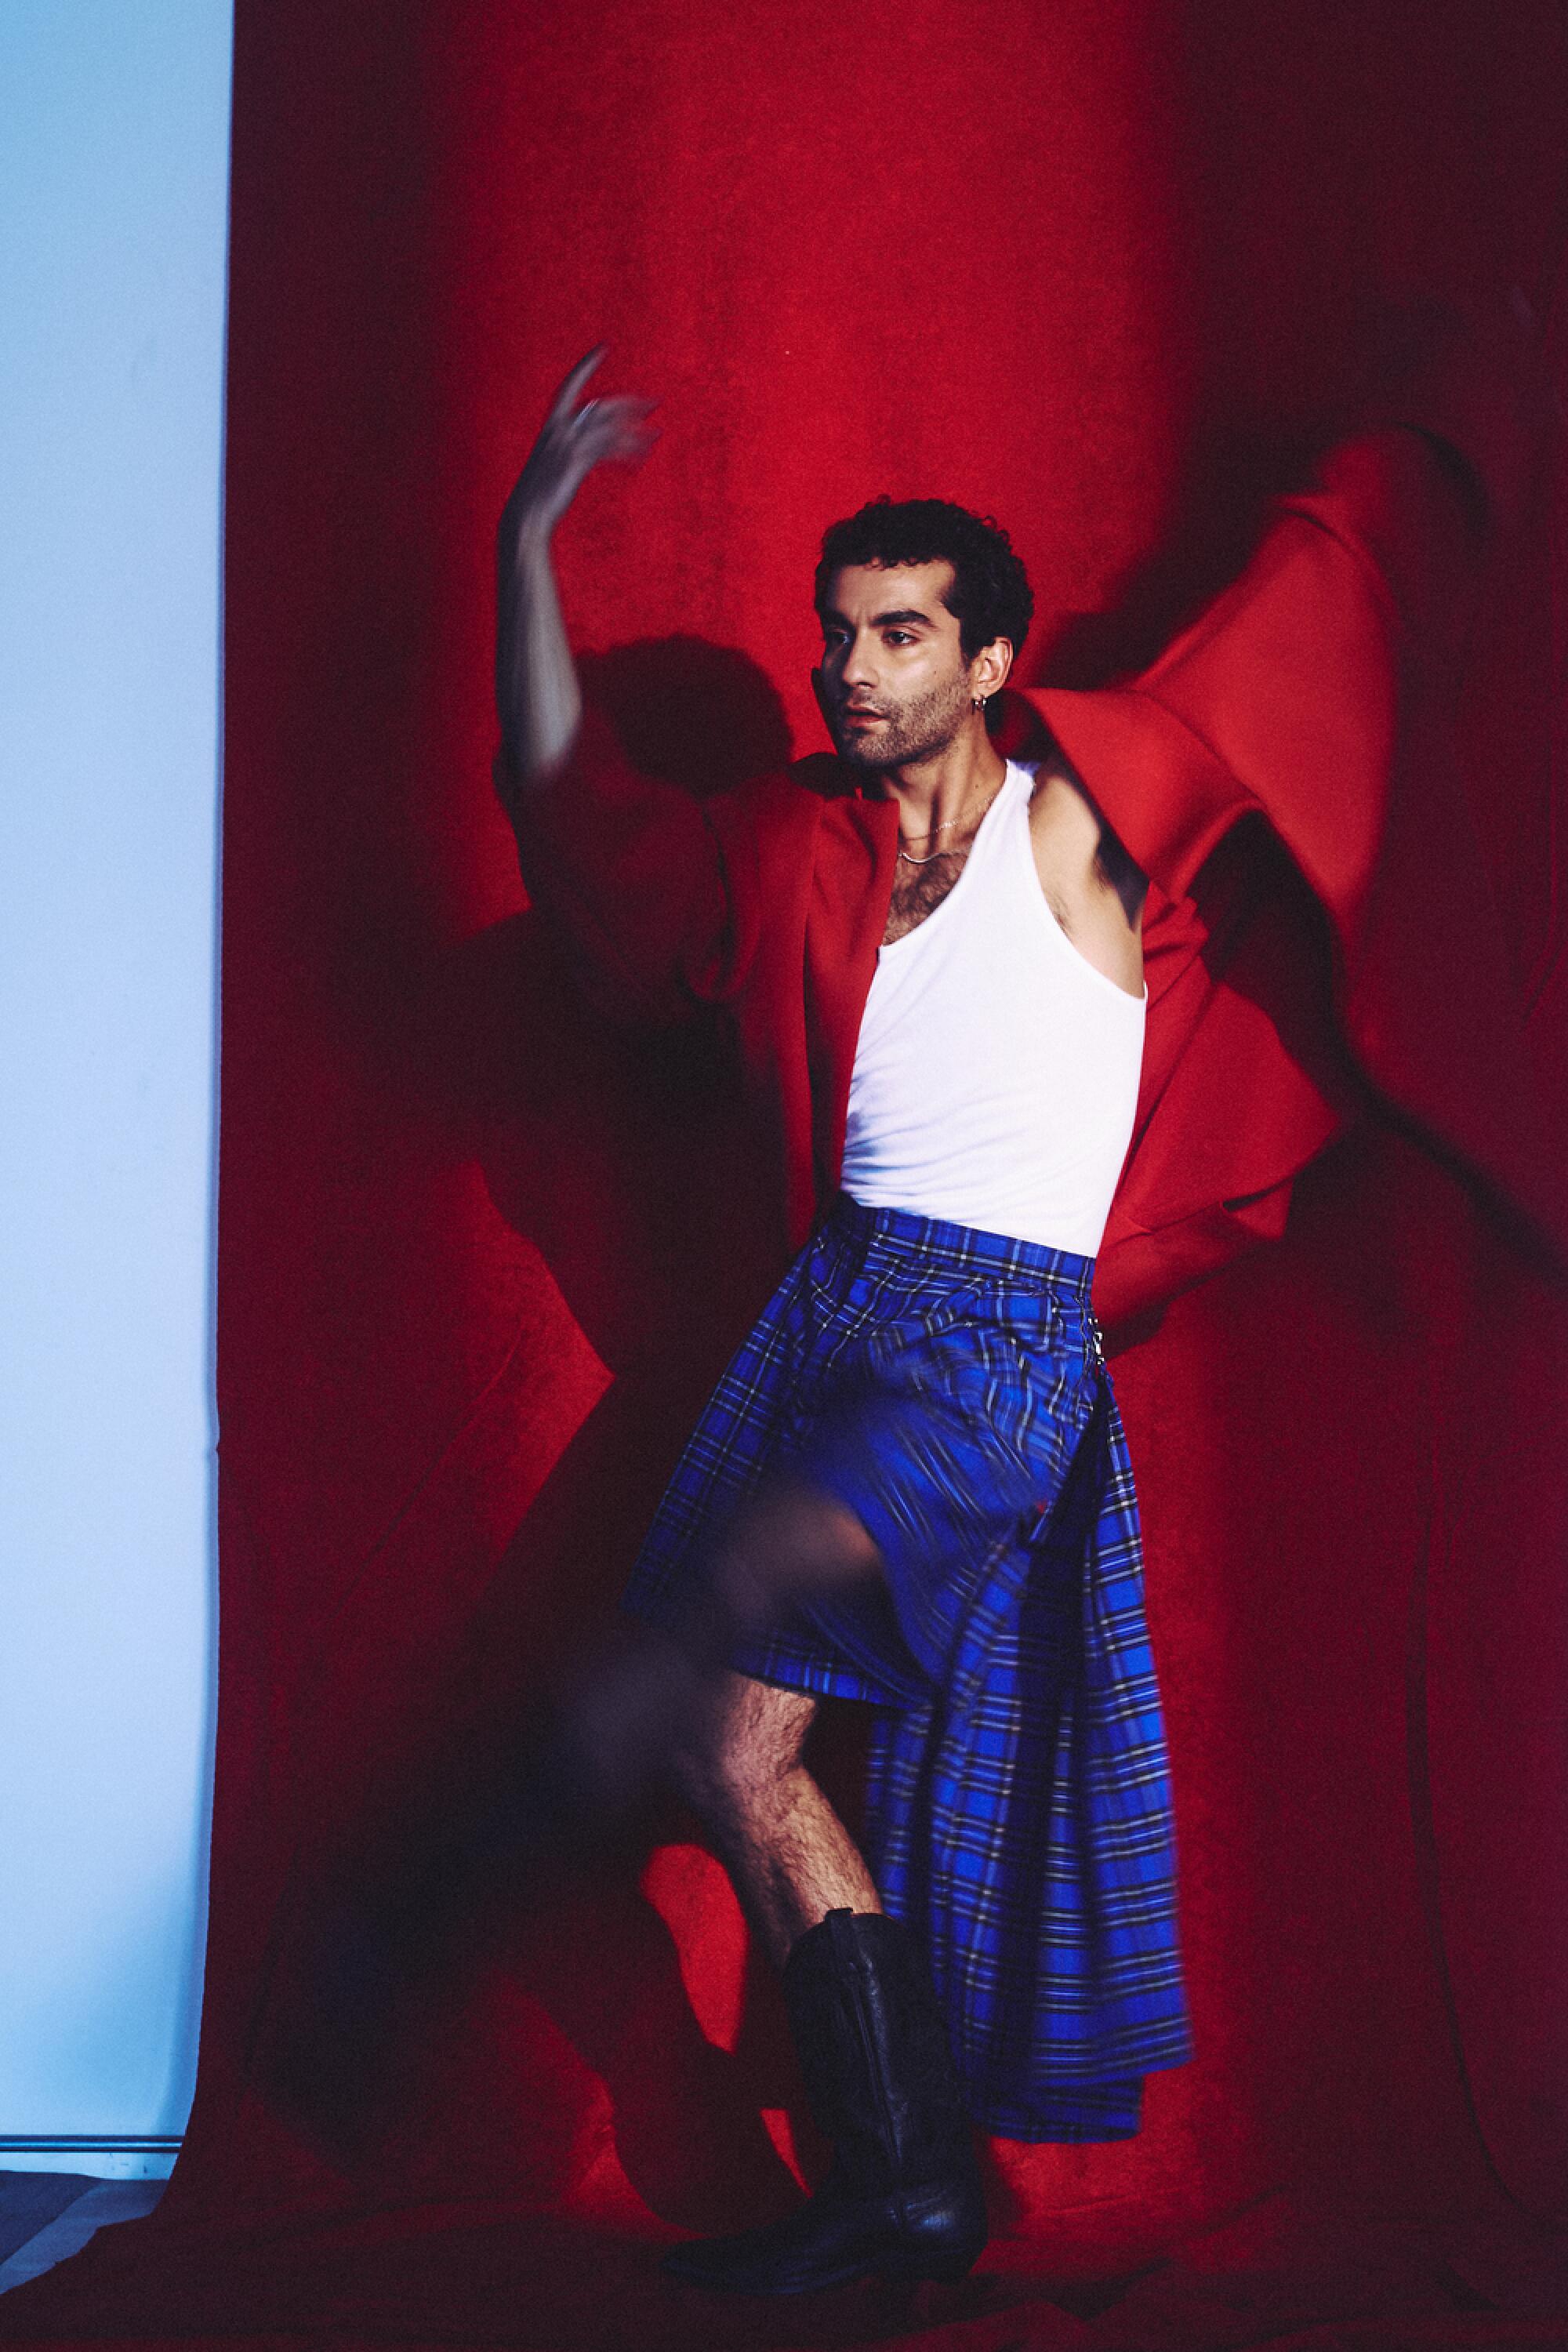 Vinícius Silva wearing a red zoot suit Jacket by Gypsy Sport and blue plaid skirt by Río Original.